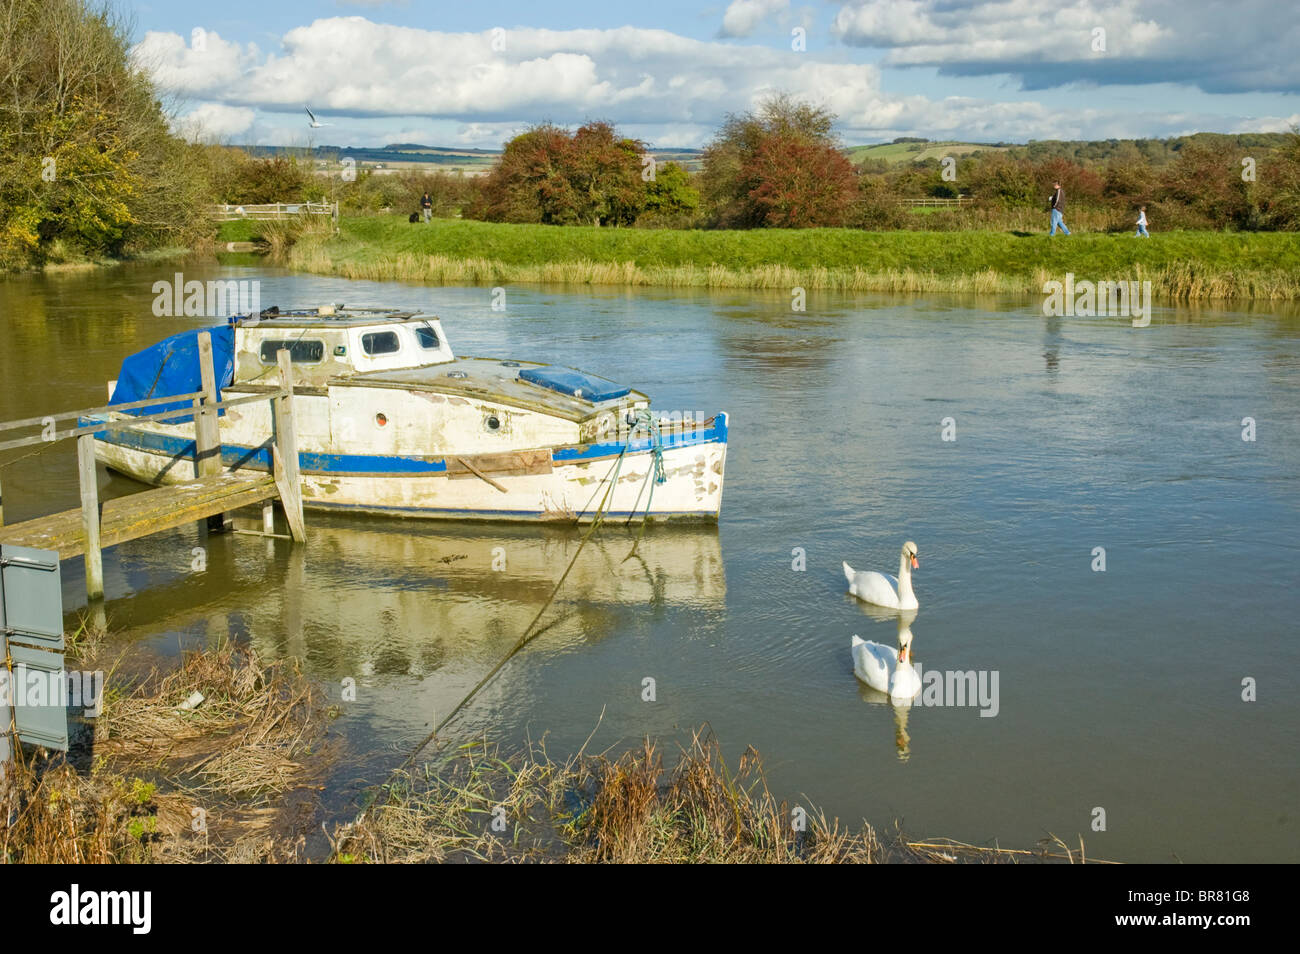 Boat moored up on the River Arun at Arundel, West Sussex, England, UK. Stock Photo